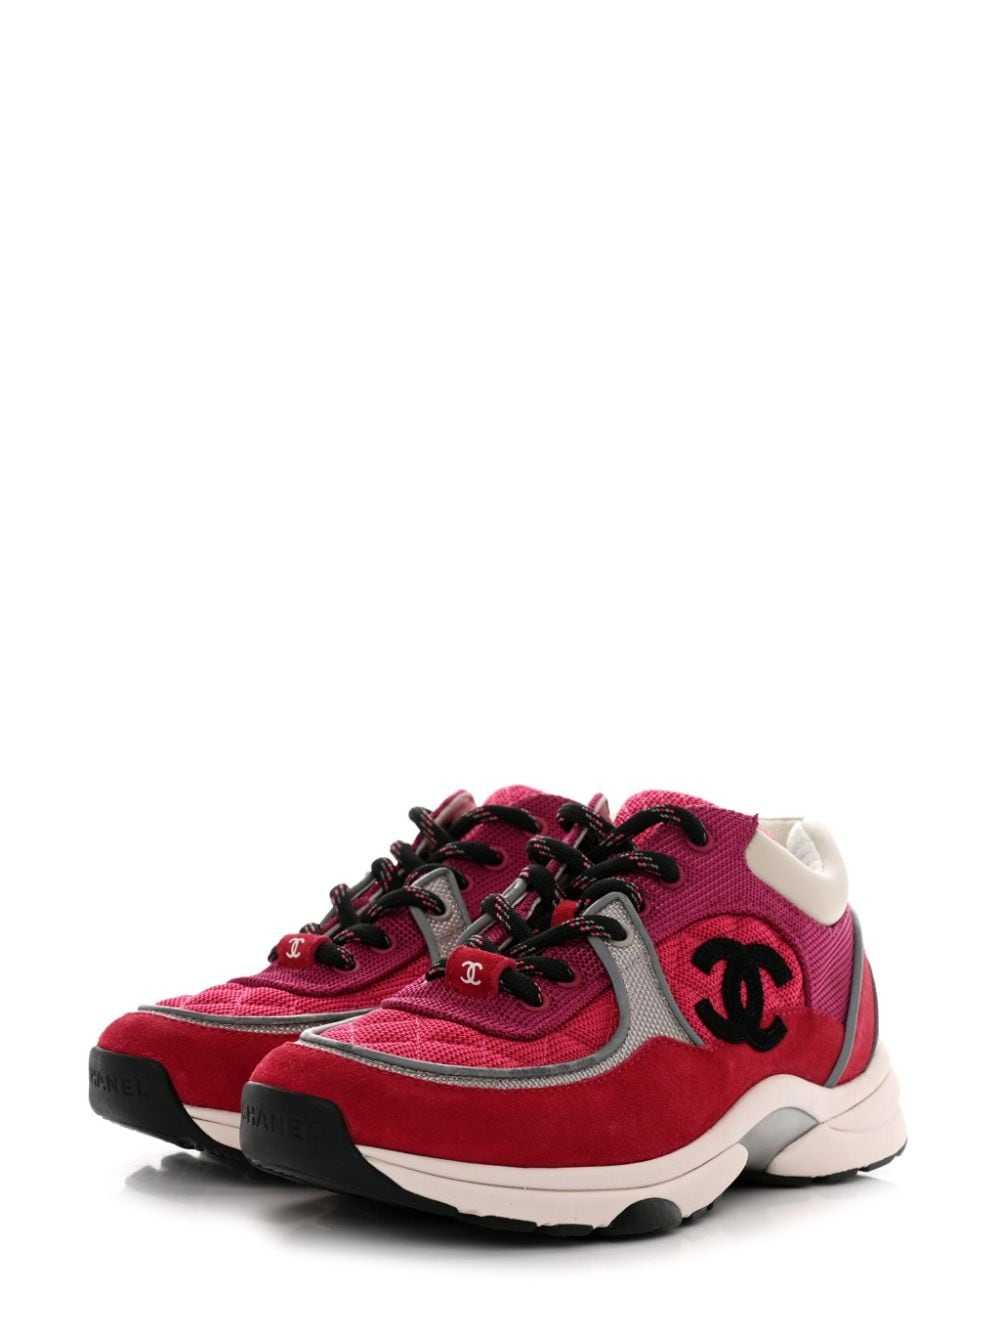 CHANEL Pre-Owned CC suede mesh sneakers - Pink - image 3